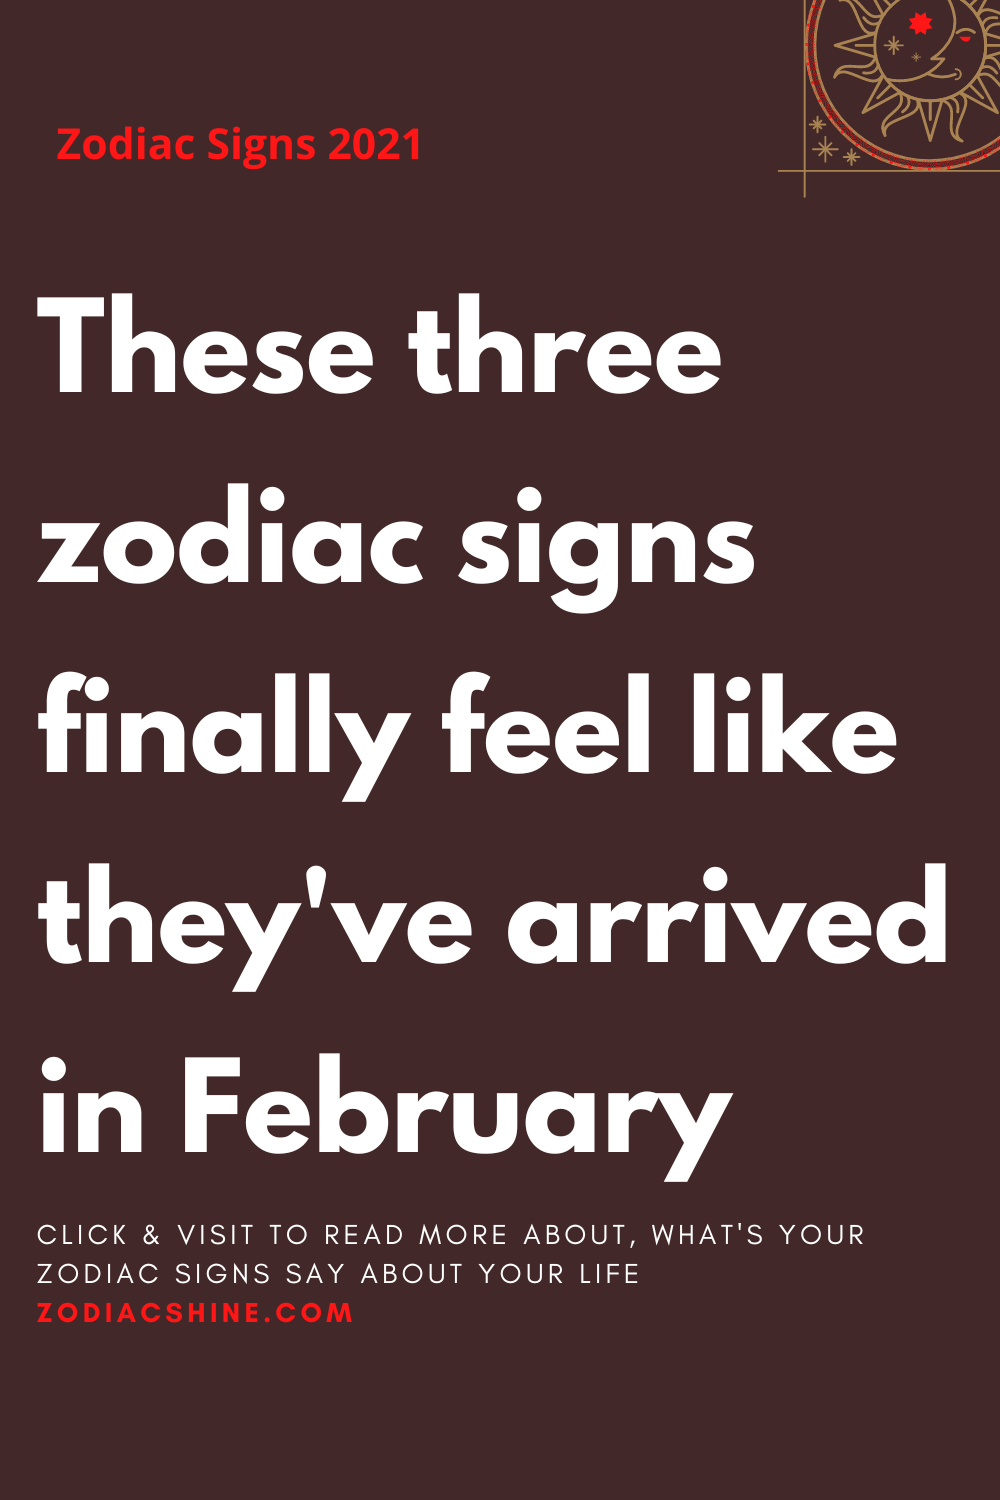 These three zodiac signs finally feel like they've arrived in February